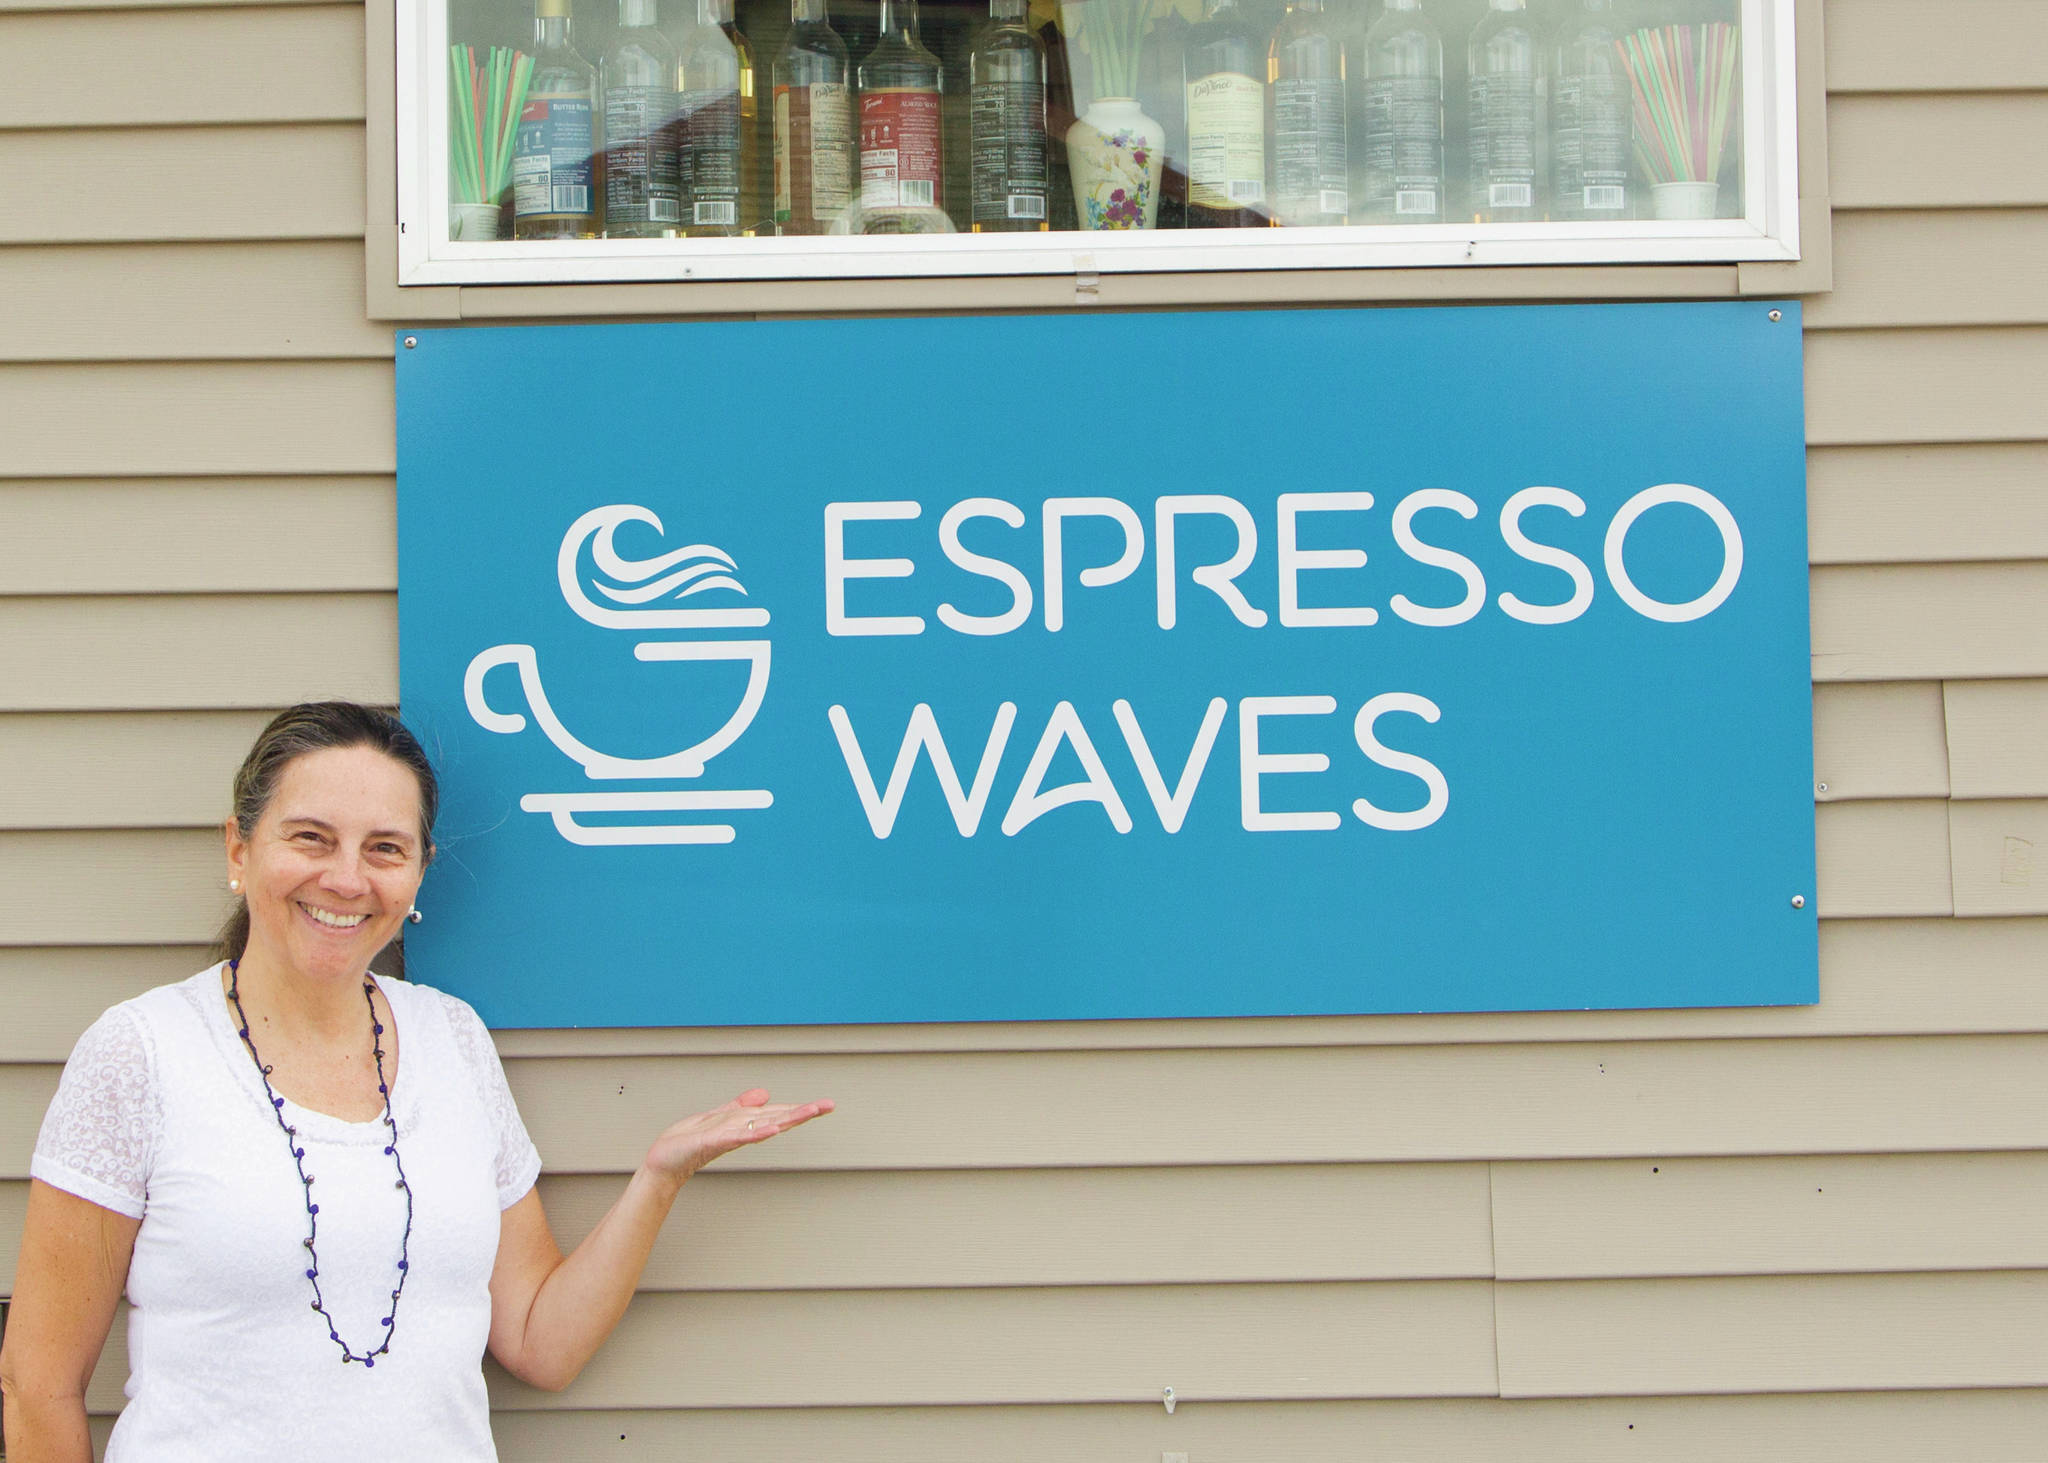 Ana Rosa Polit opened Espresso Waves, a coffee drive-through, on May 1. (Photo by Sarah Knapp/Homer News)